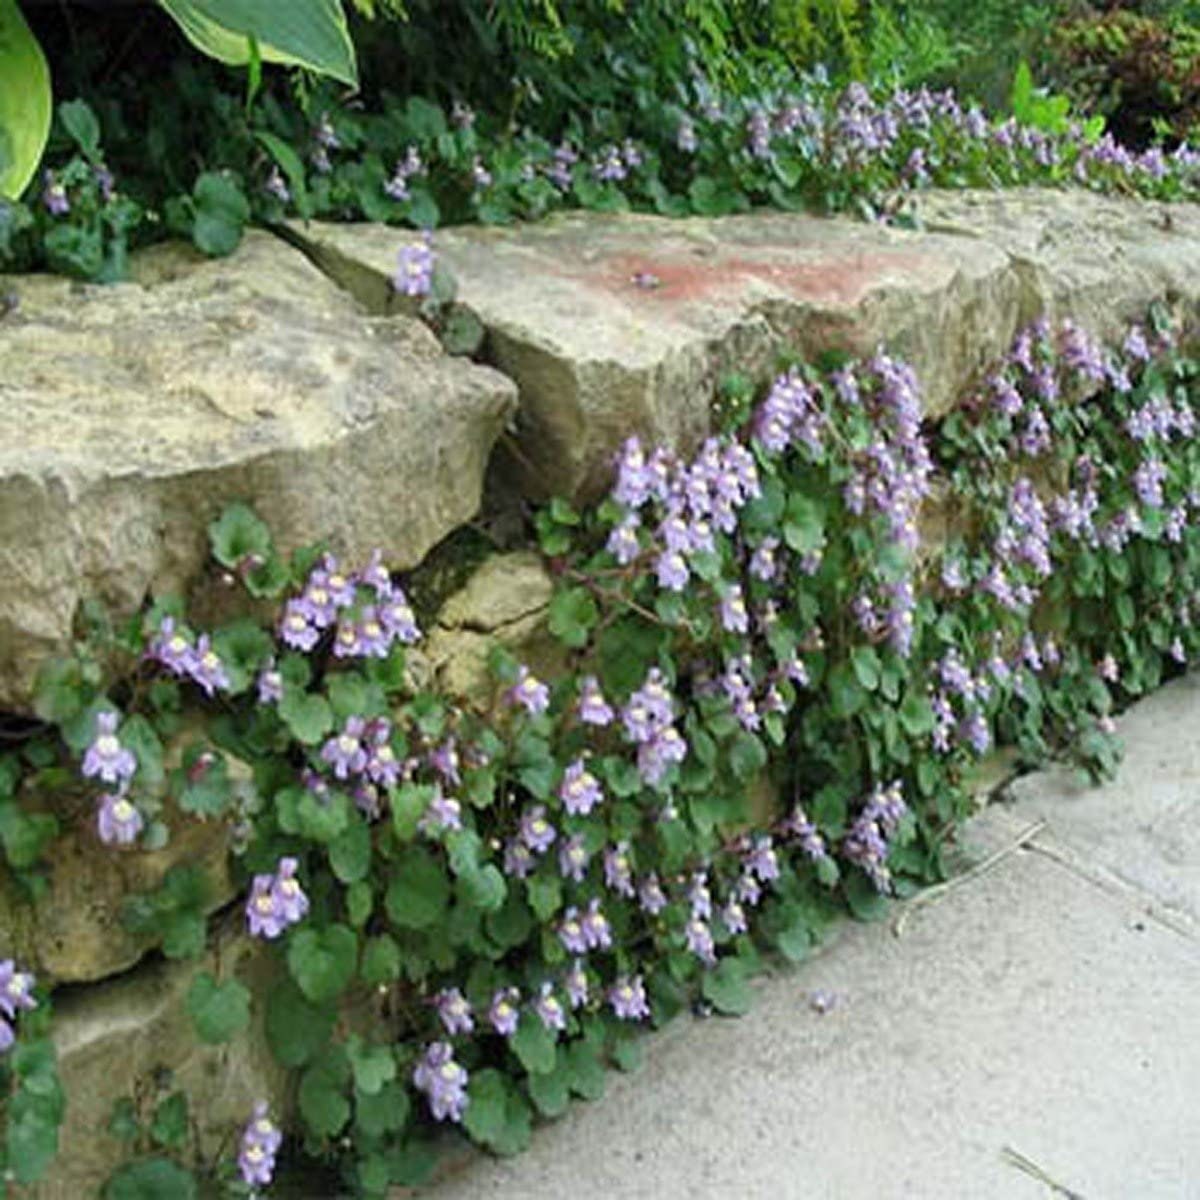 100+ Kenilworth Ivy Flower Seeds-Cymbalaria Muralis-B245-Ivy-Leaved Toadflax- Coliseum Ivy- Self sowing high spreading Perennial!